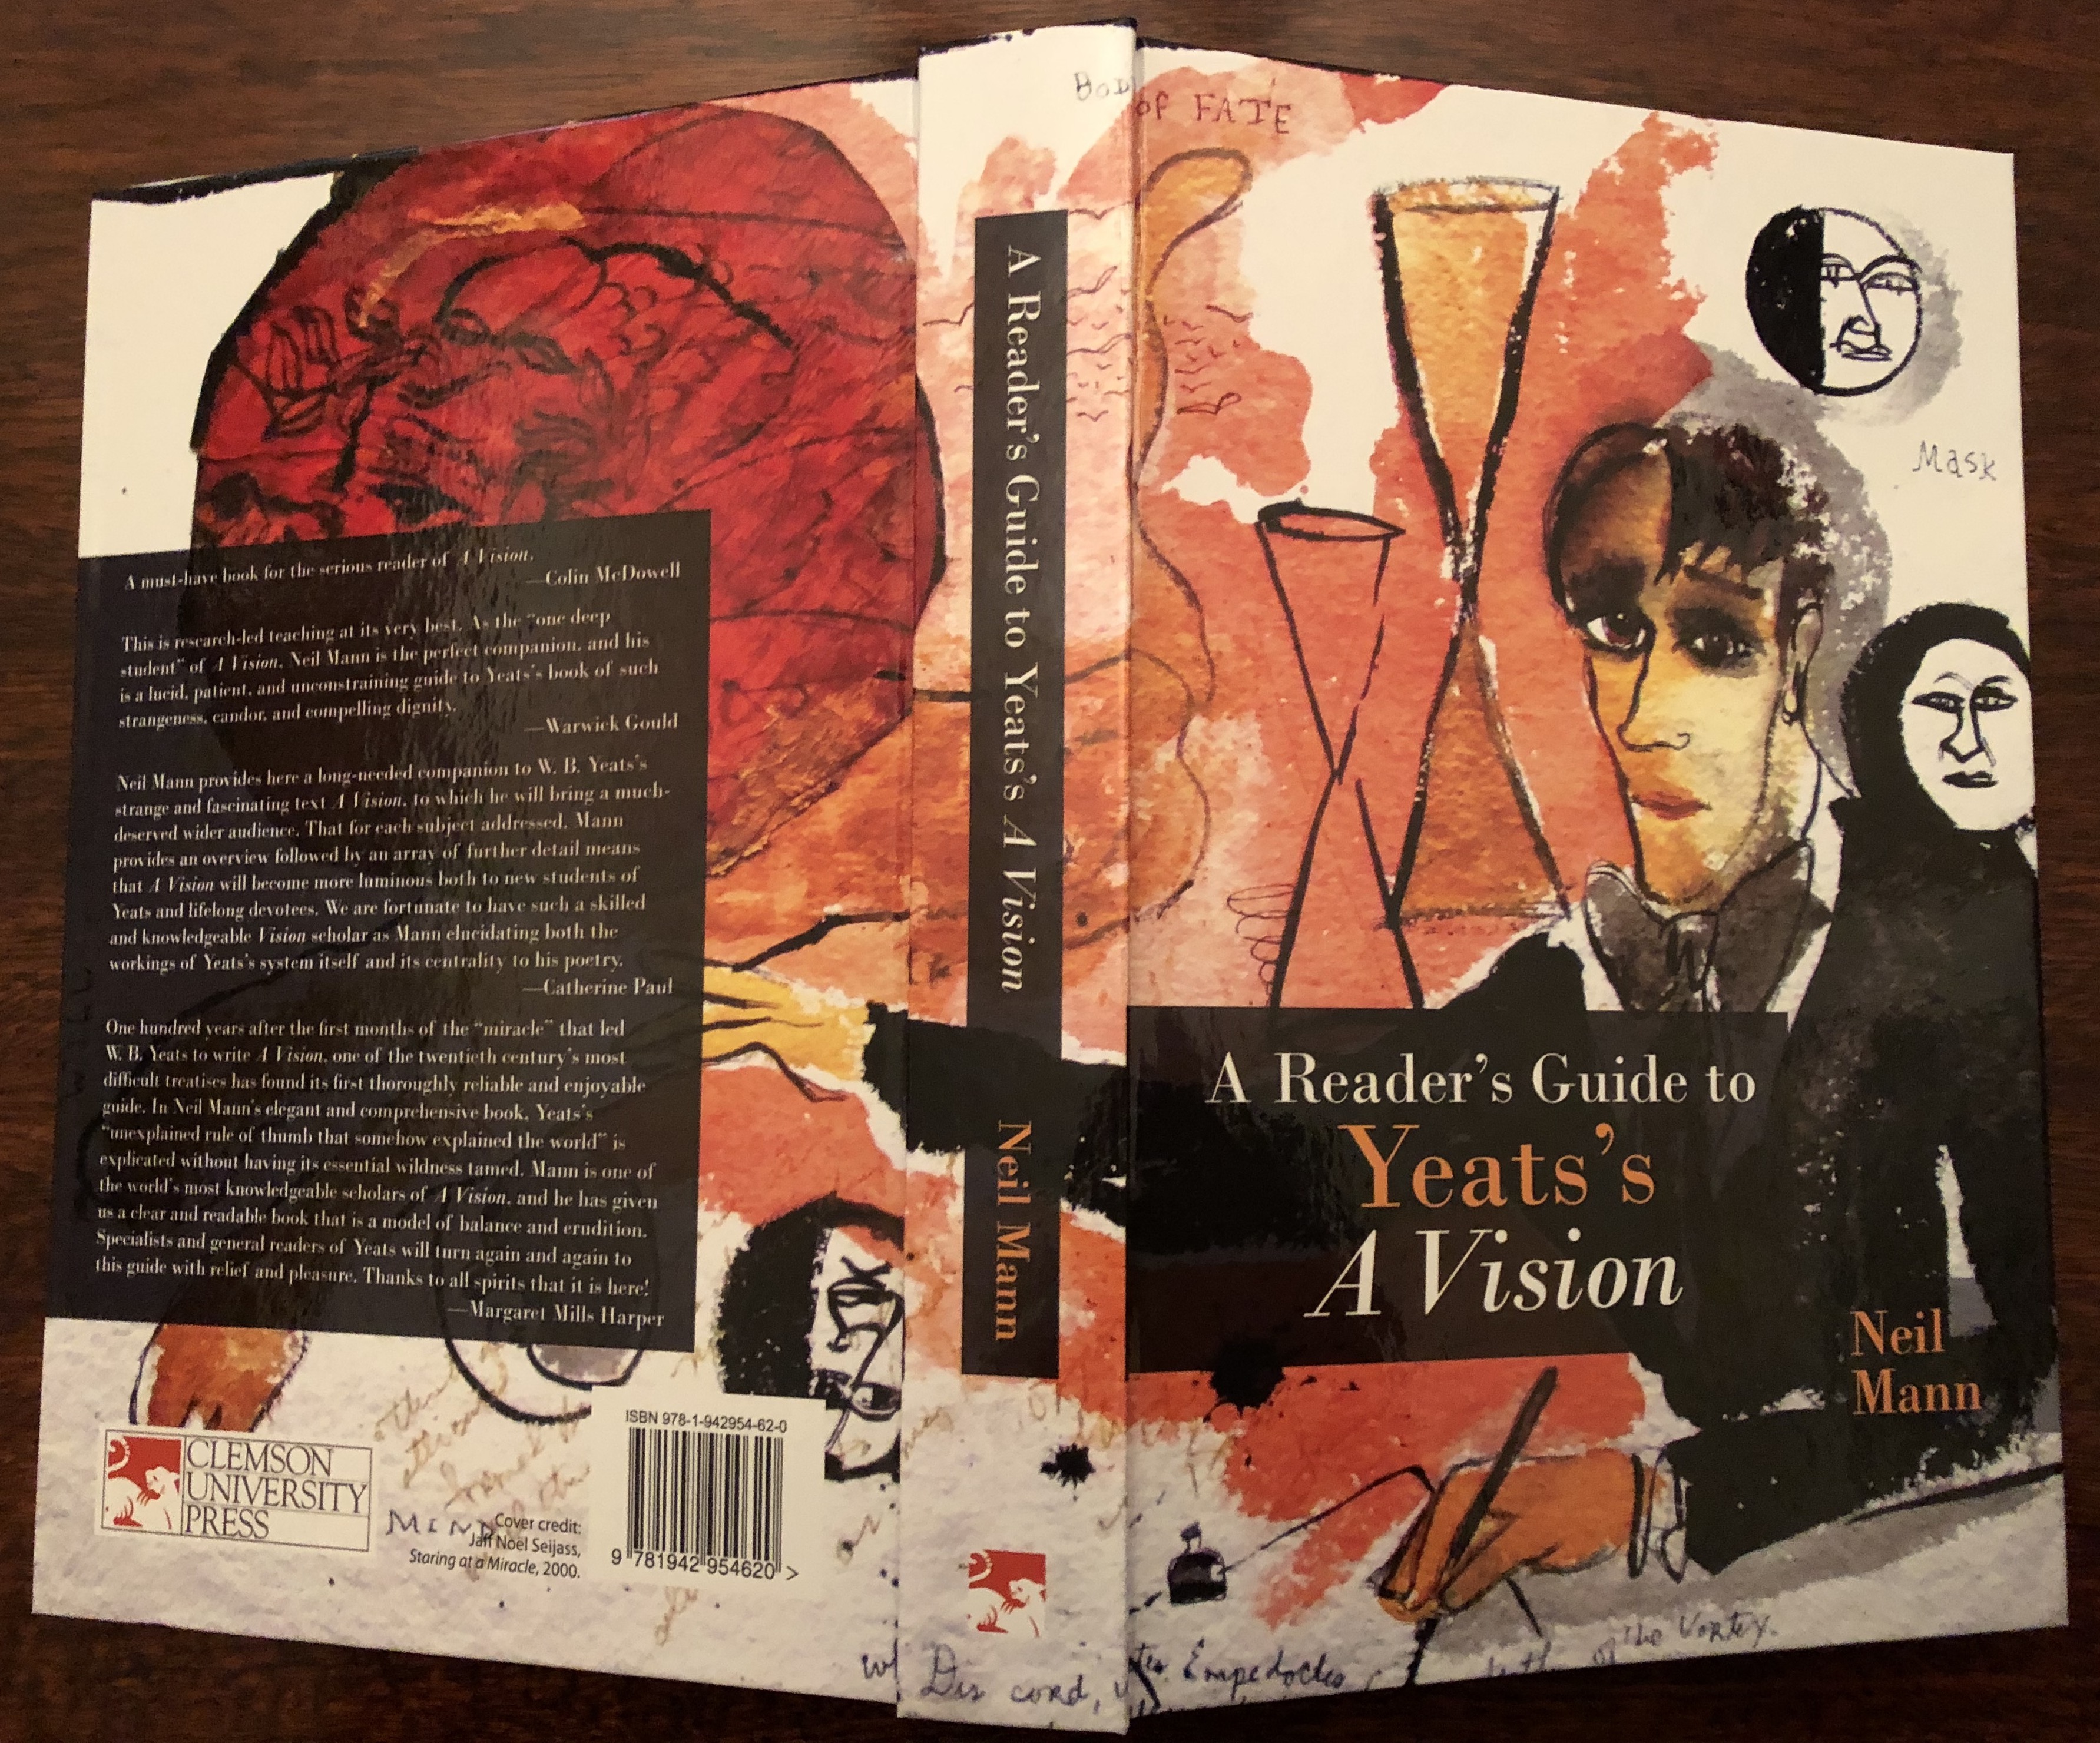 A Reader's Guide to Yeats's 'A Vision' book cover